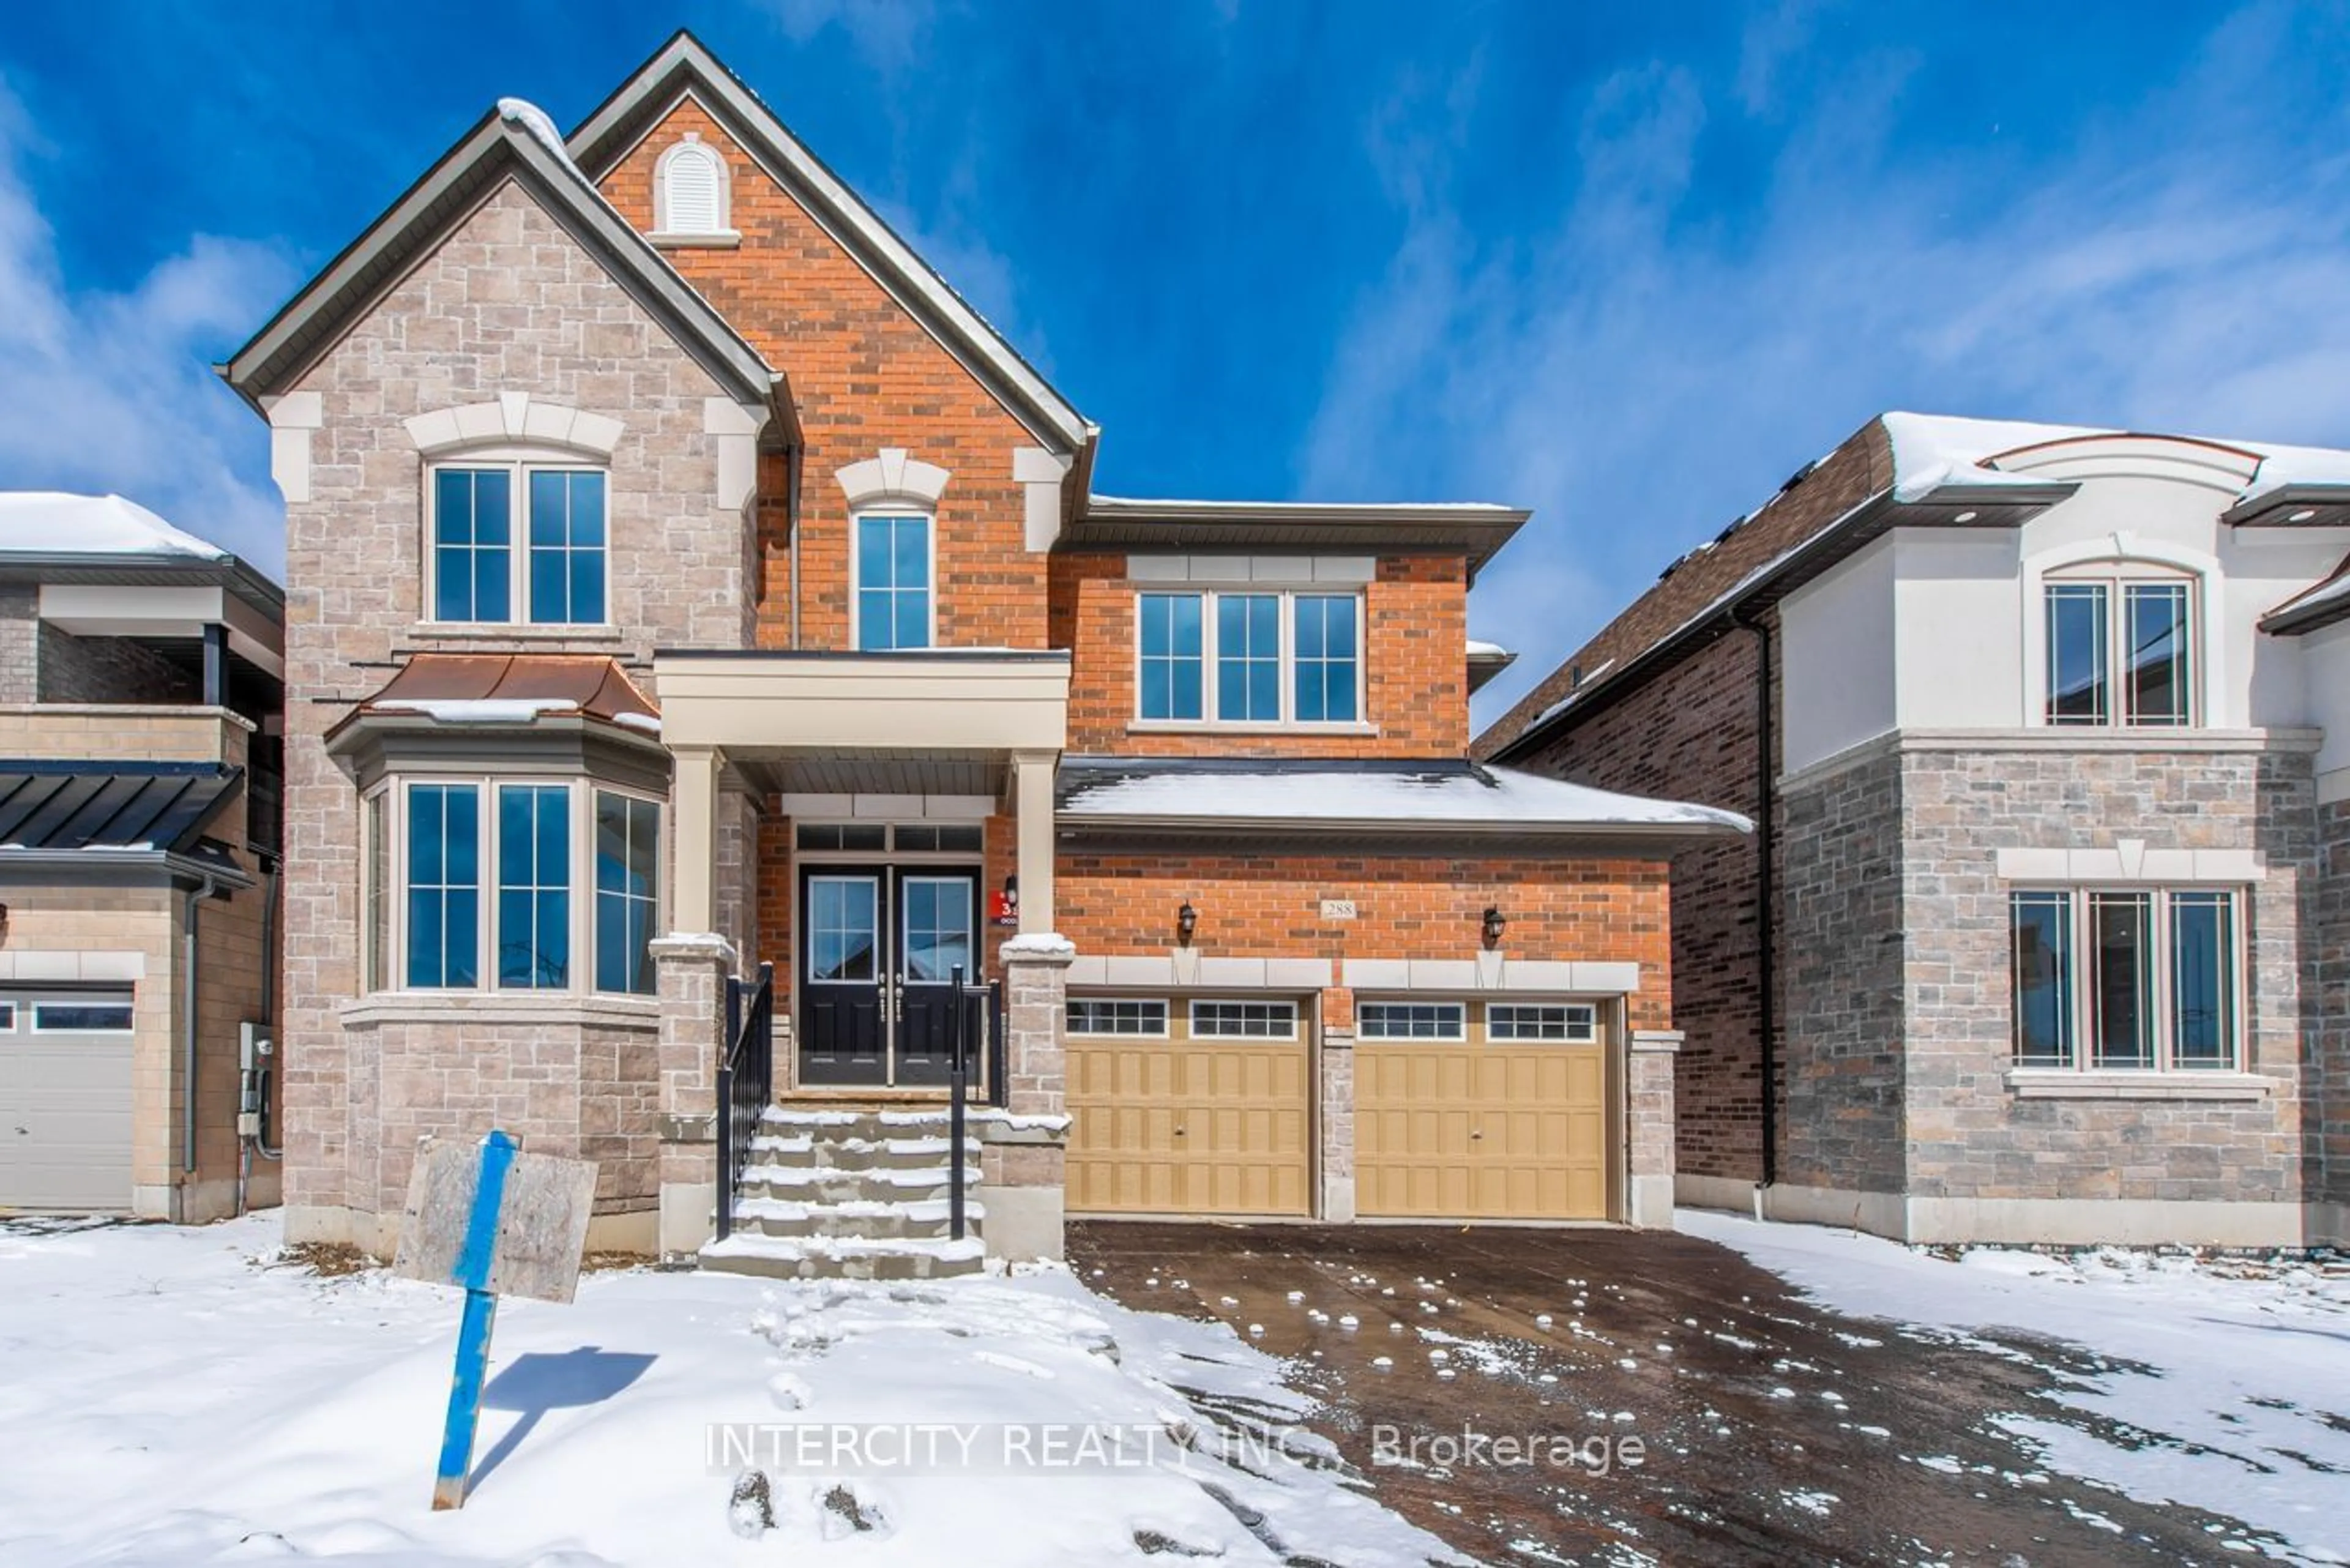 Home with brick exterior material for 288 Ben Sinclair Ave, East Gwillimbury Ontario L9N 0Z1